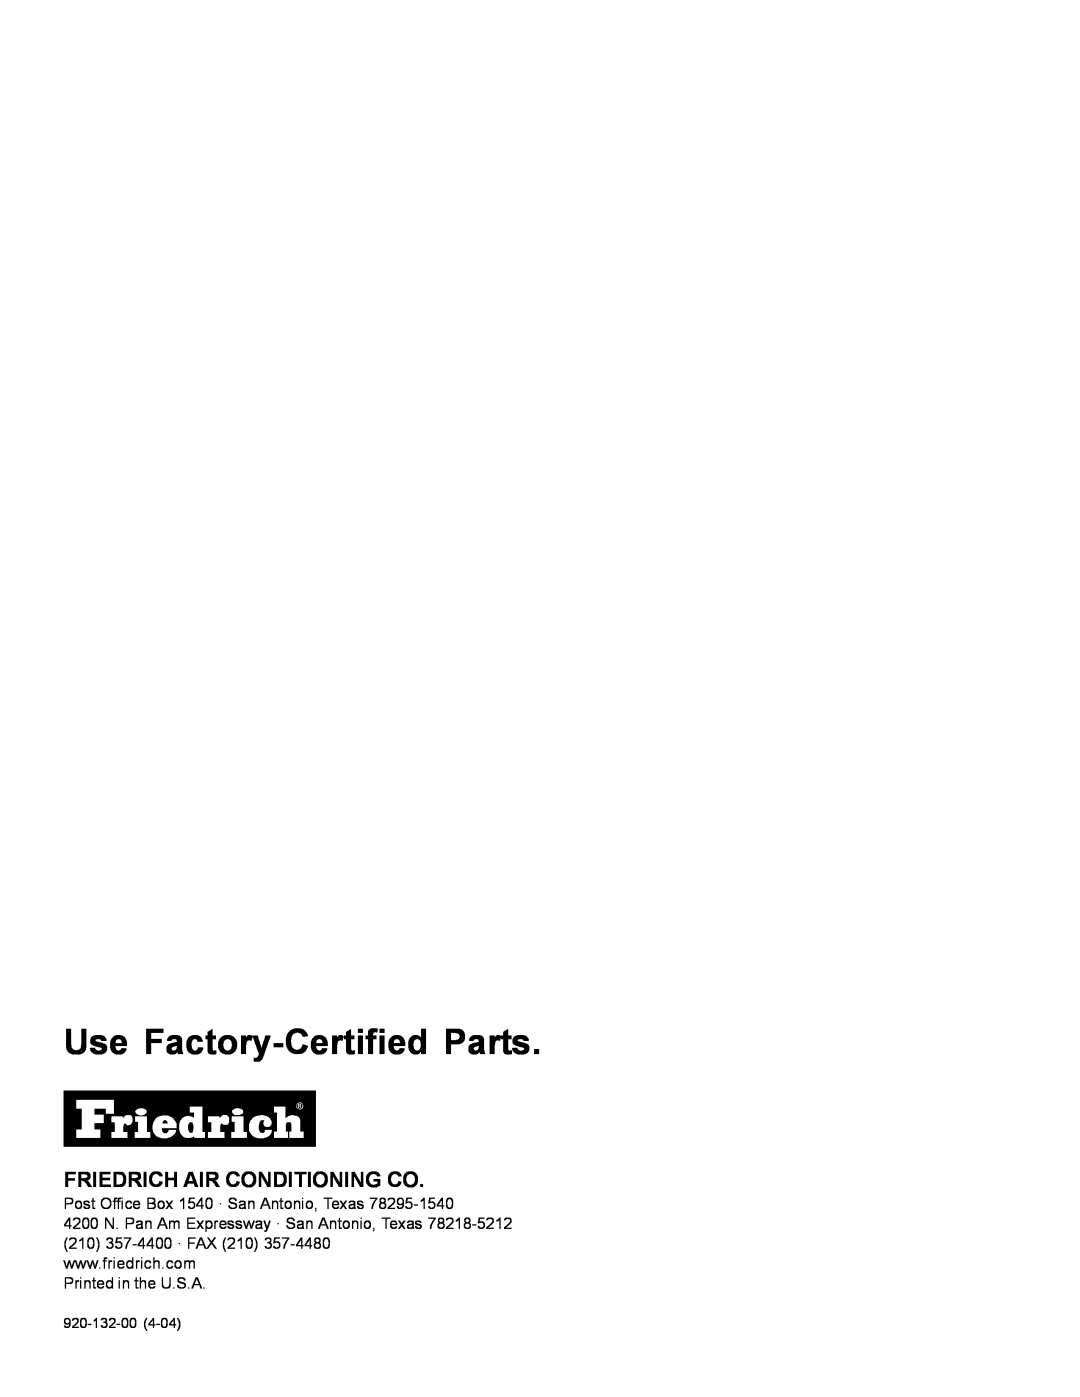 Friedrich 2004 manual Use Factory-CertifiedParts, Friedrich Air Conditioning Co 